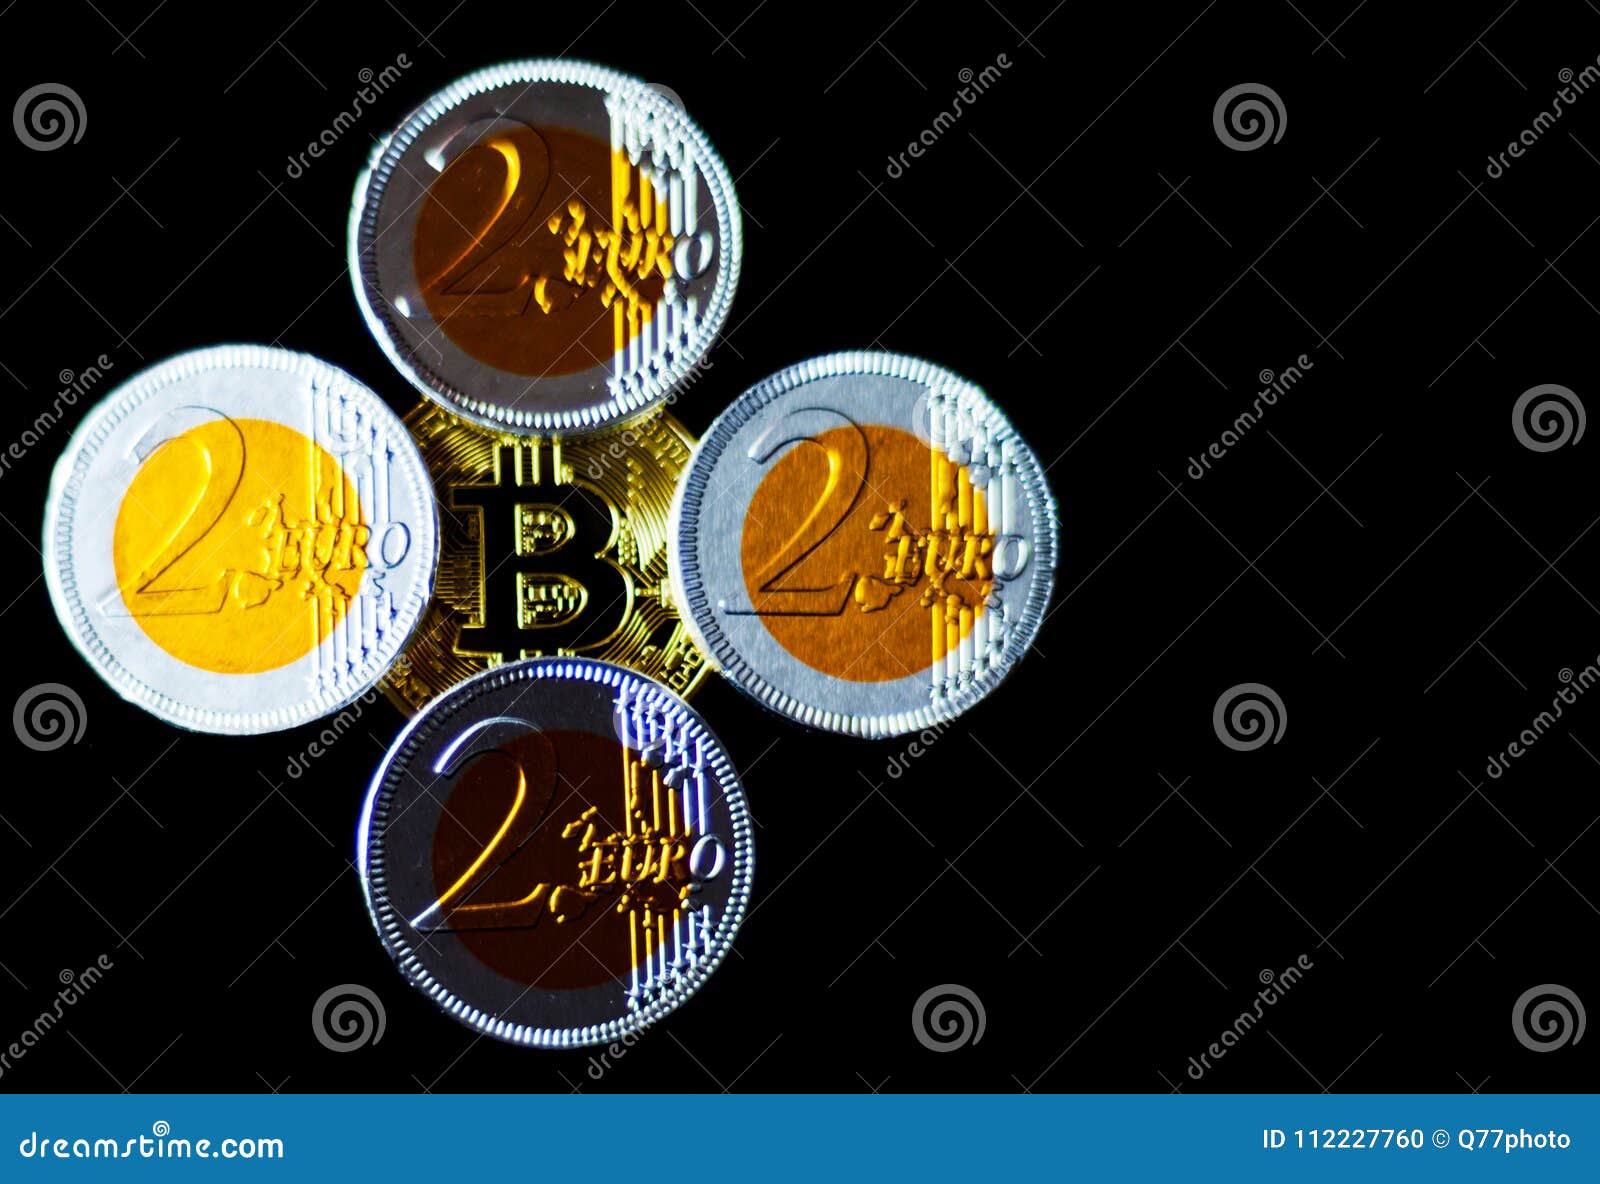 Candy coin crypto most accurate current price and volume for crypto currencies